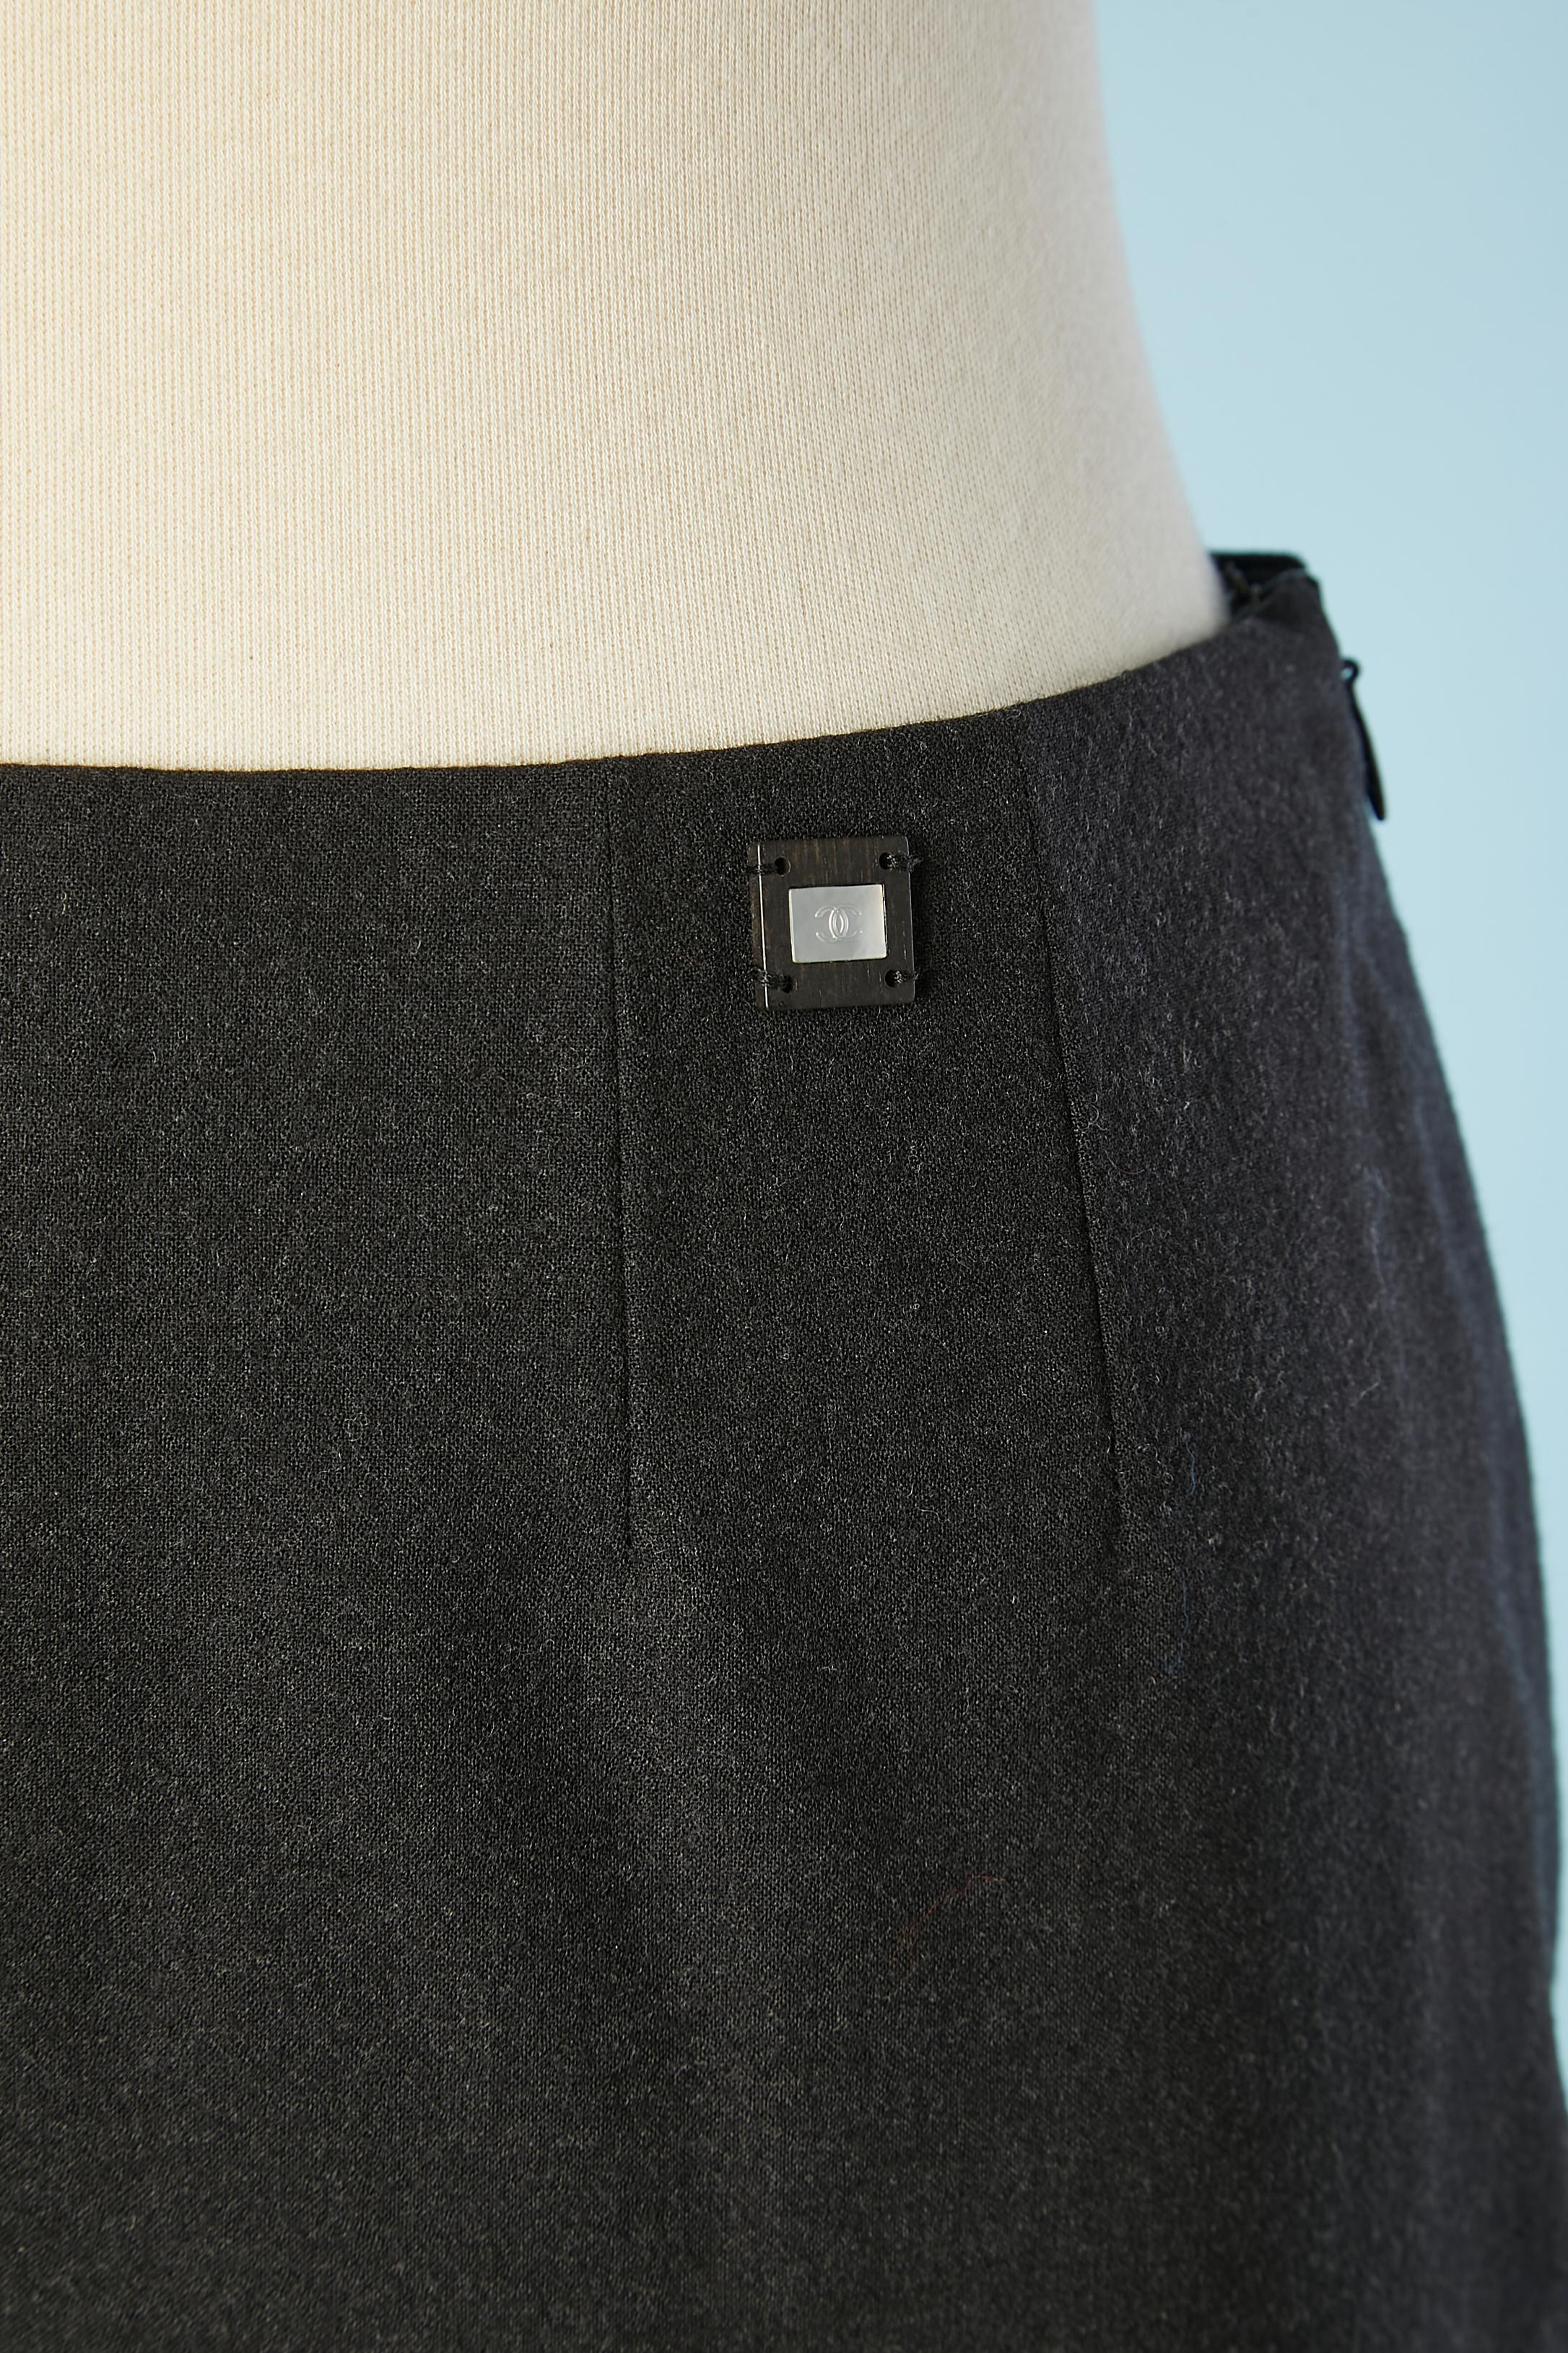 Black wool trouser with silk lining. Main fabric composition: 95% wool, 5% lycra. 
Lining composition: 90% silk, 10% elasthane.
Tiny 